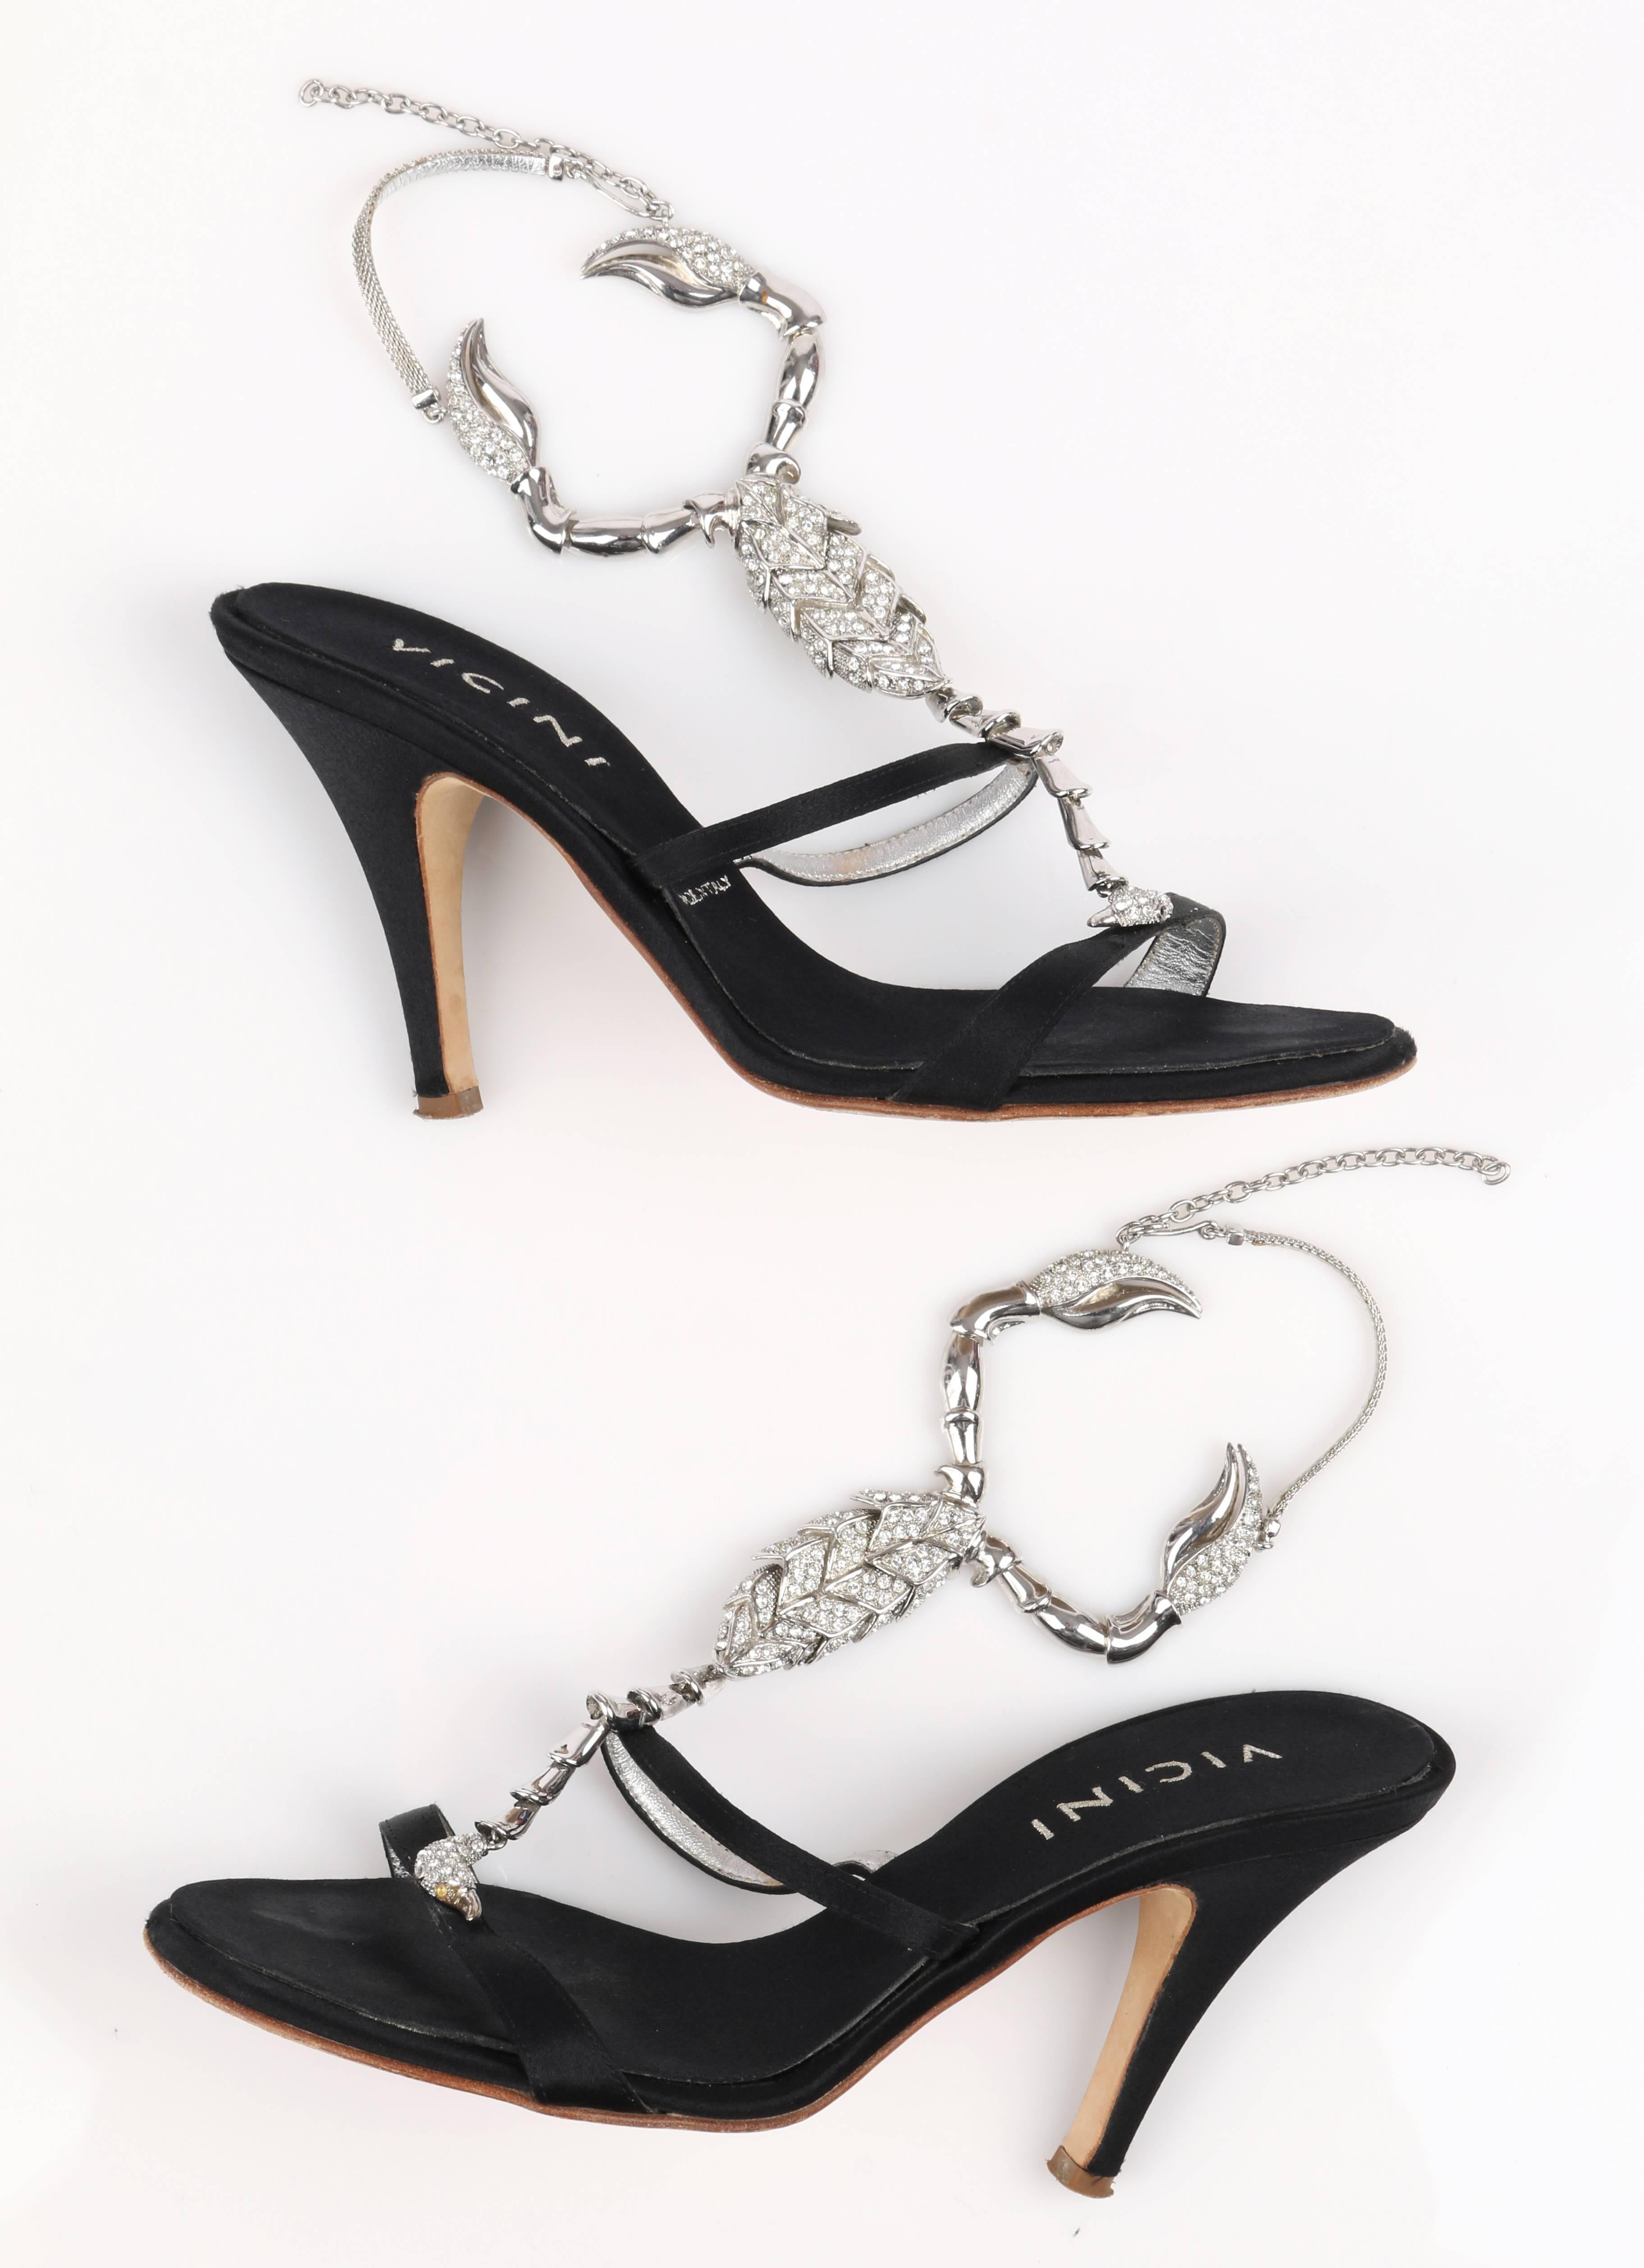 Vicini by Giuseppe Zanotti Limited Edition 2015 black satin scorpion embellished high heels. Upper is detailed with a large silver & diamond-rhinestone embellished scorpion design. Open toe. Back ankle strap is silver chain with adjustable hook.